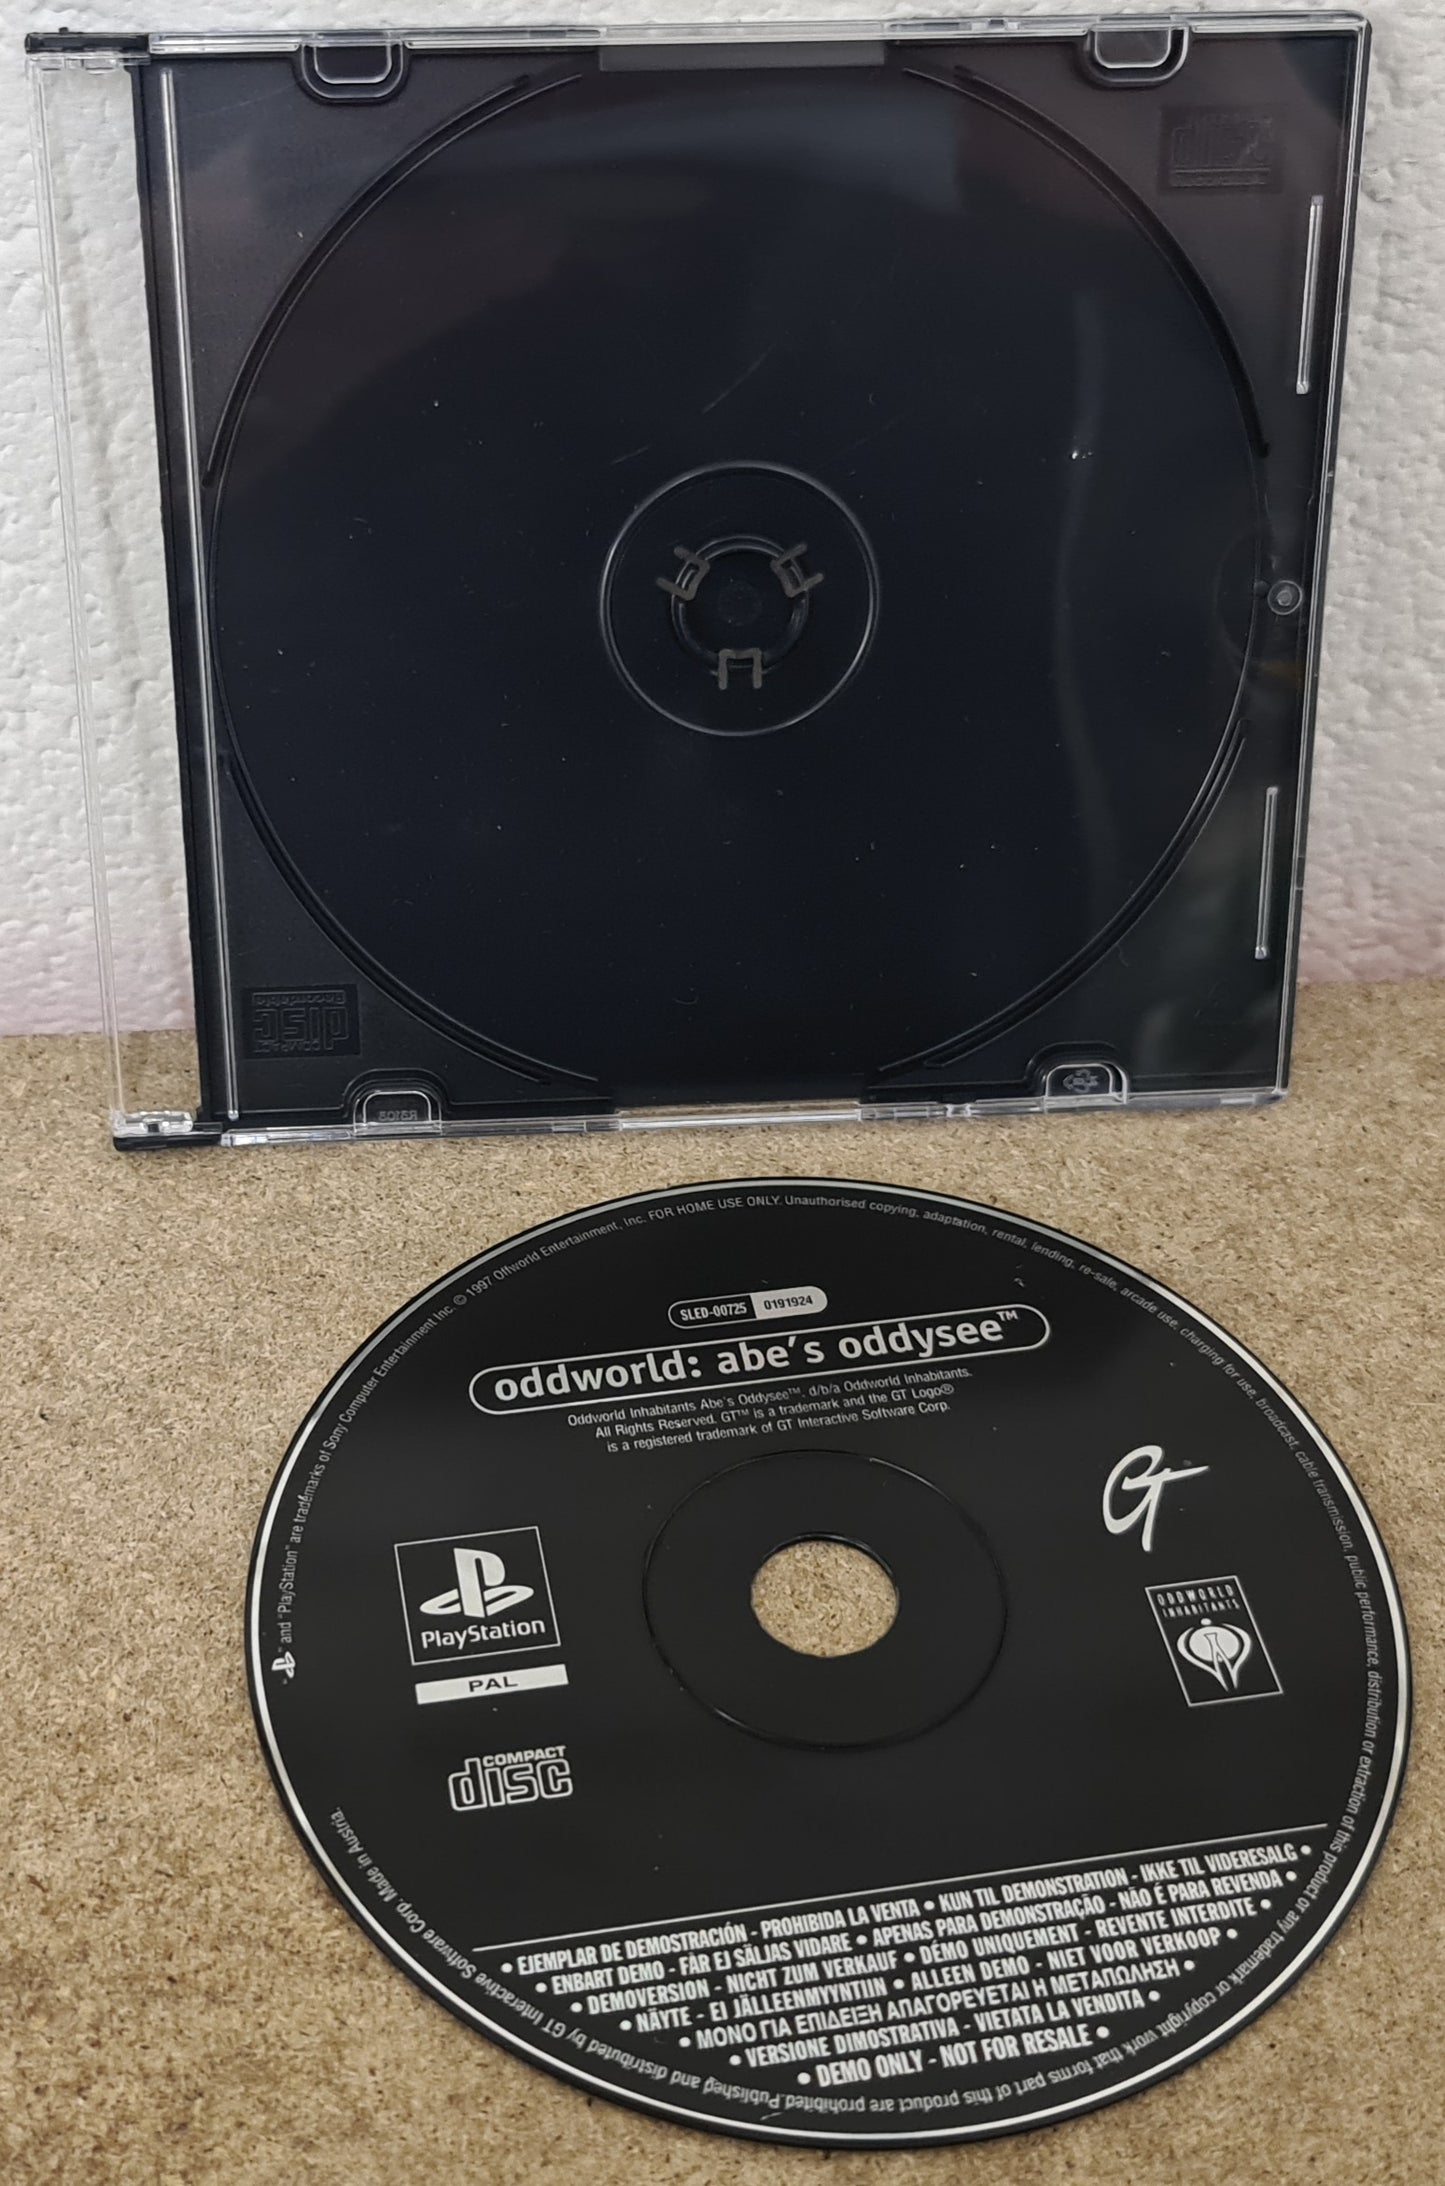 Oddworld Abe's Oddysee Sony Playstation 1 (PS1) Demo Disc Only